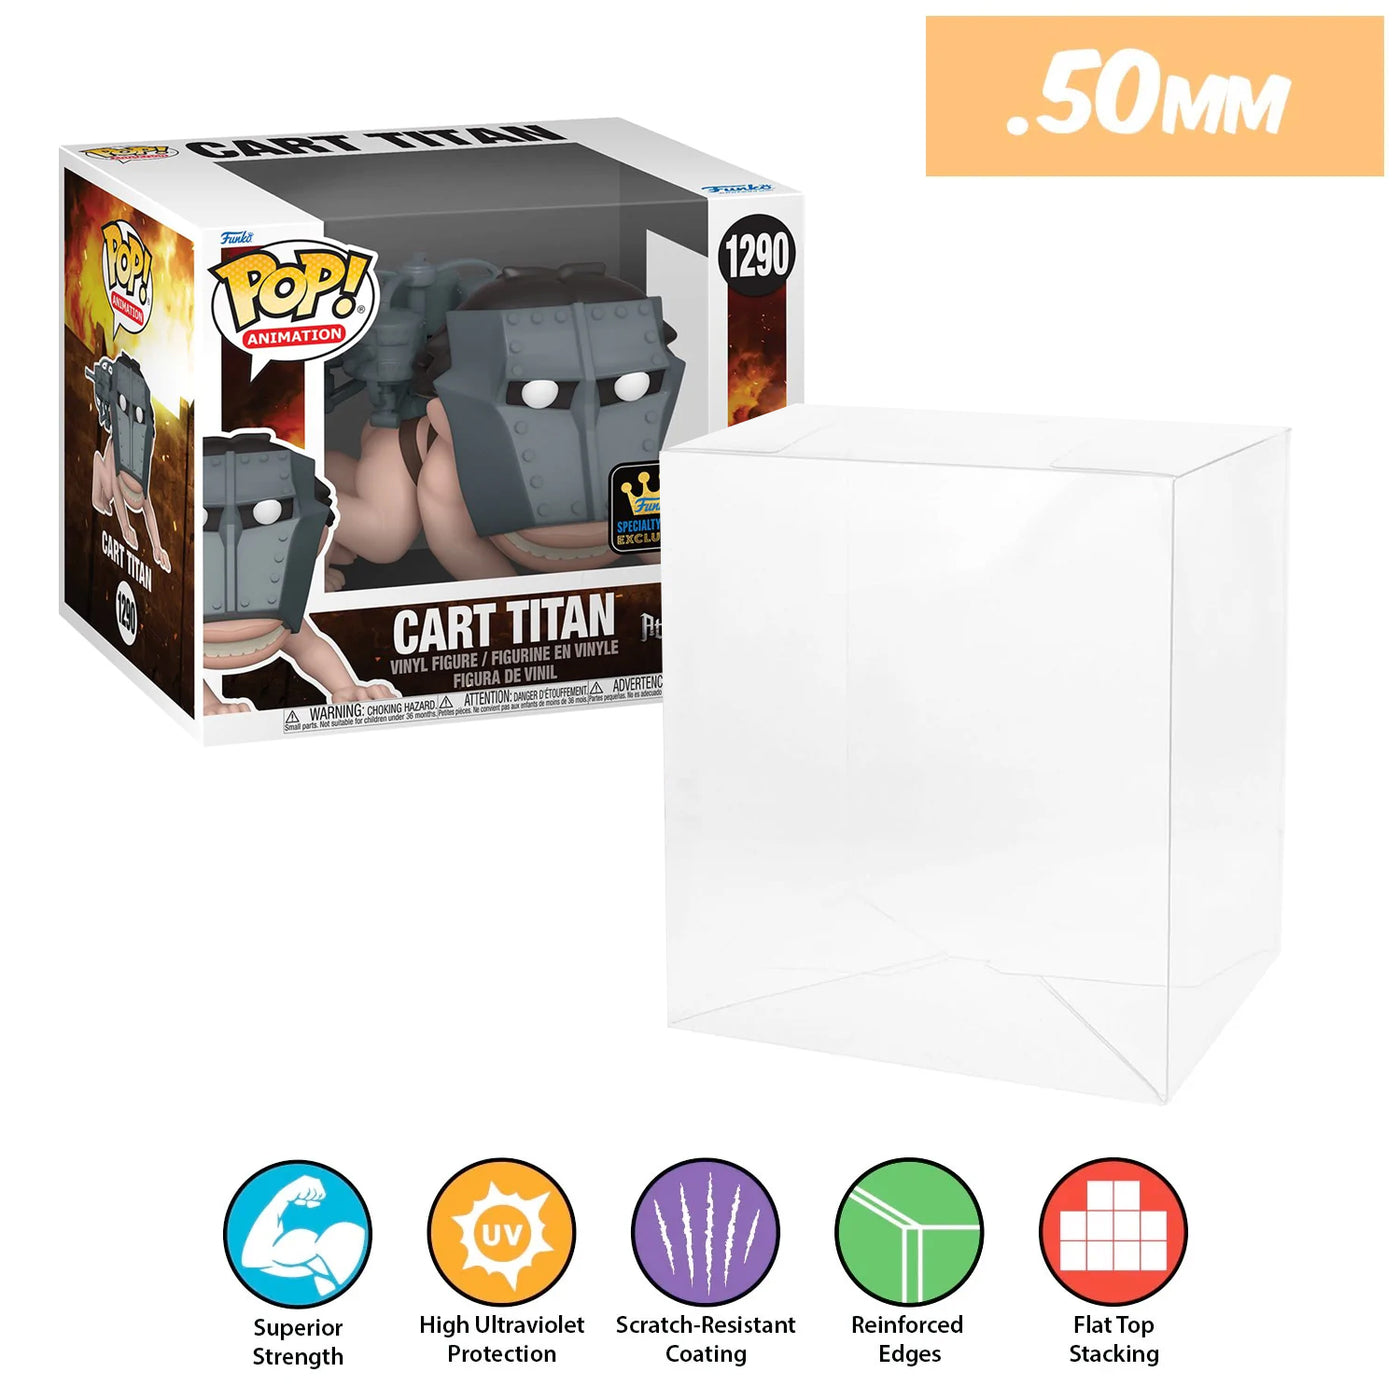 attack on titan 1290 cart titan best funko pop protectors thick strong uv scratch flat top stack vinyl display geek plastic shield vaulted eco armor fits collect protect display case kollector protector